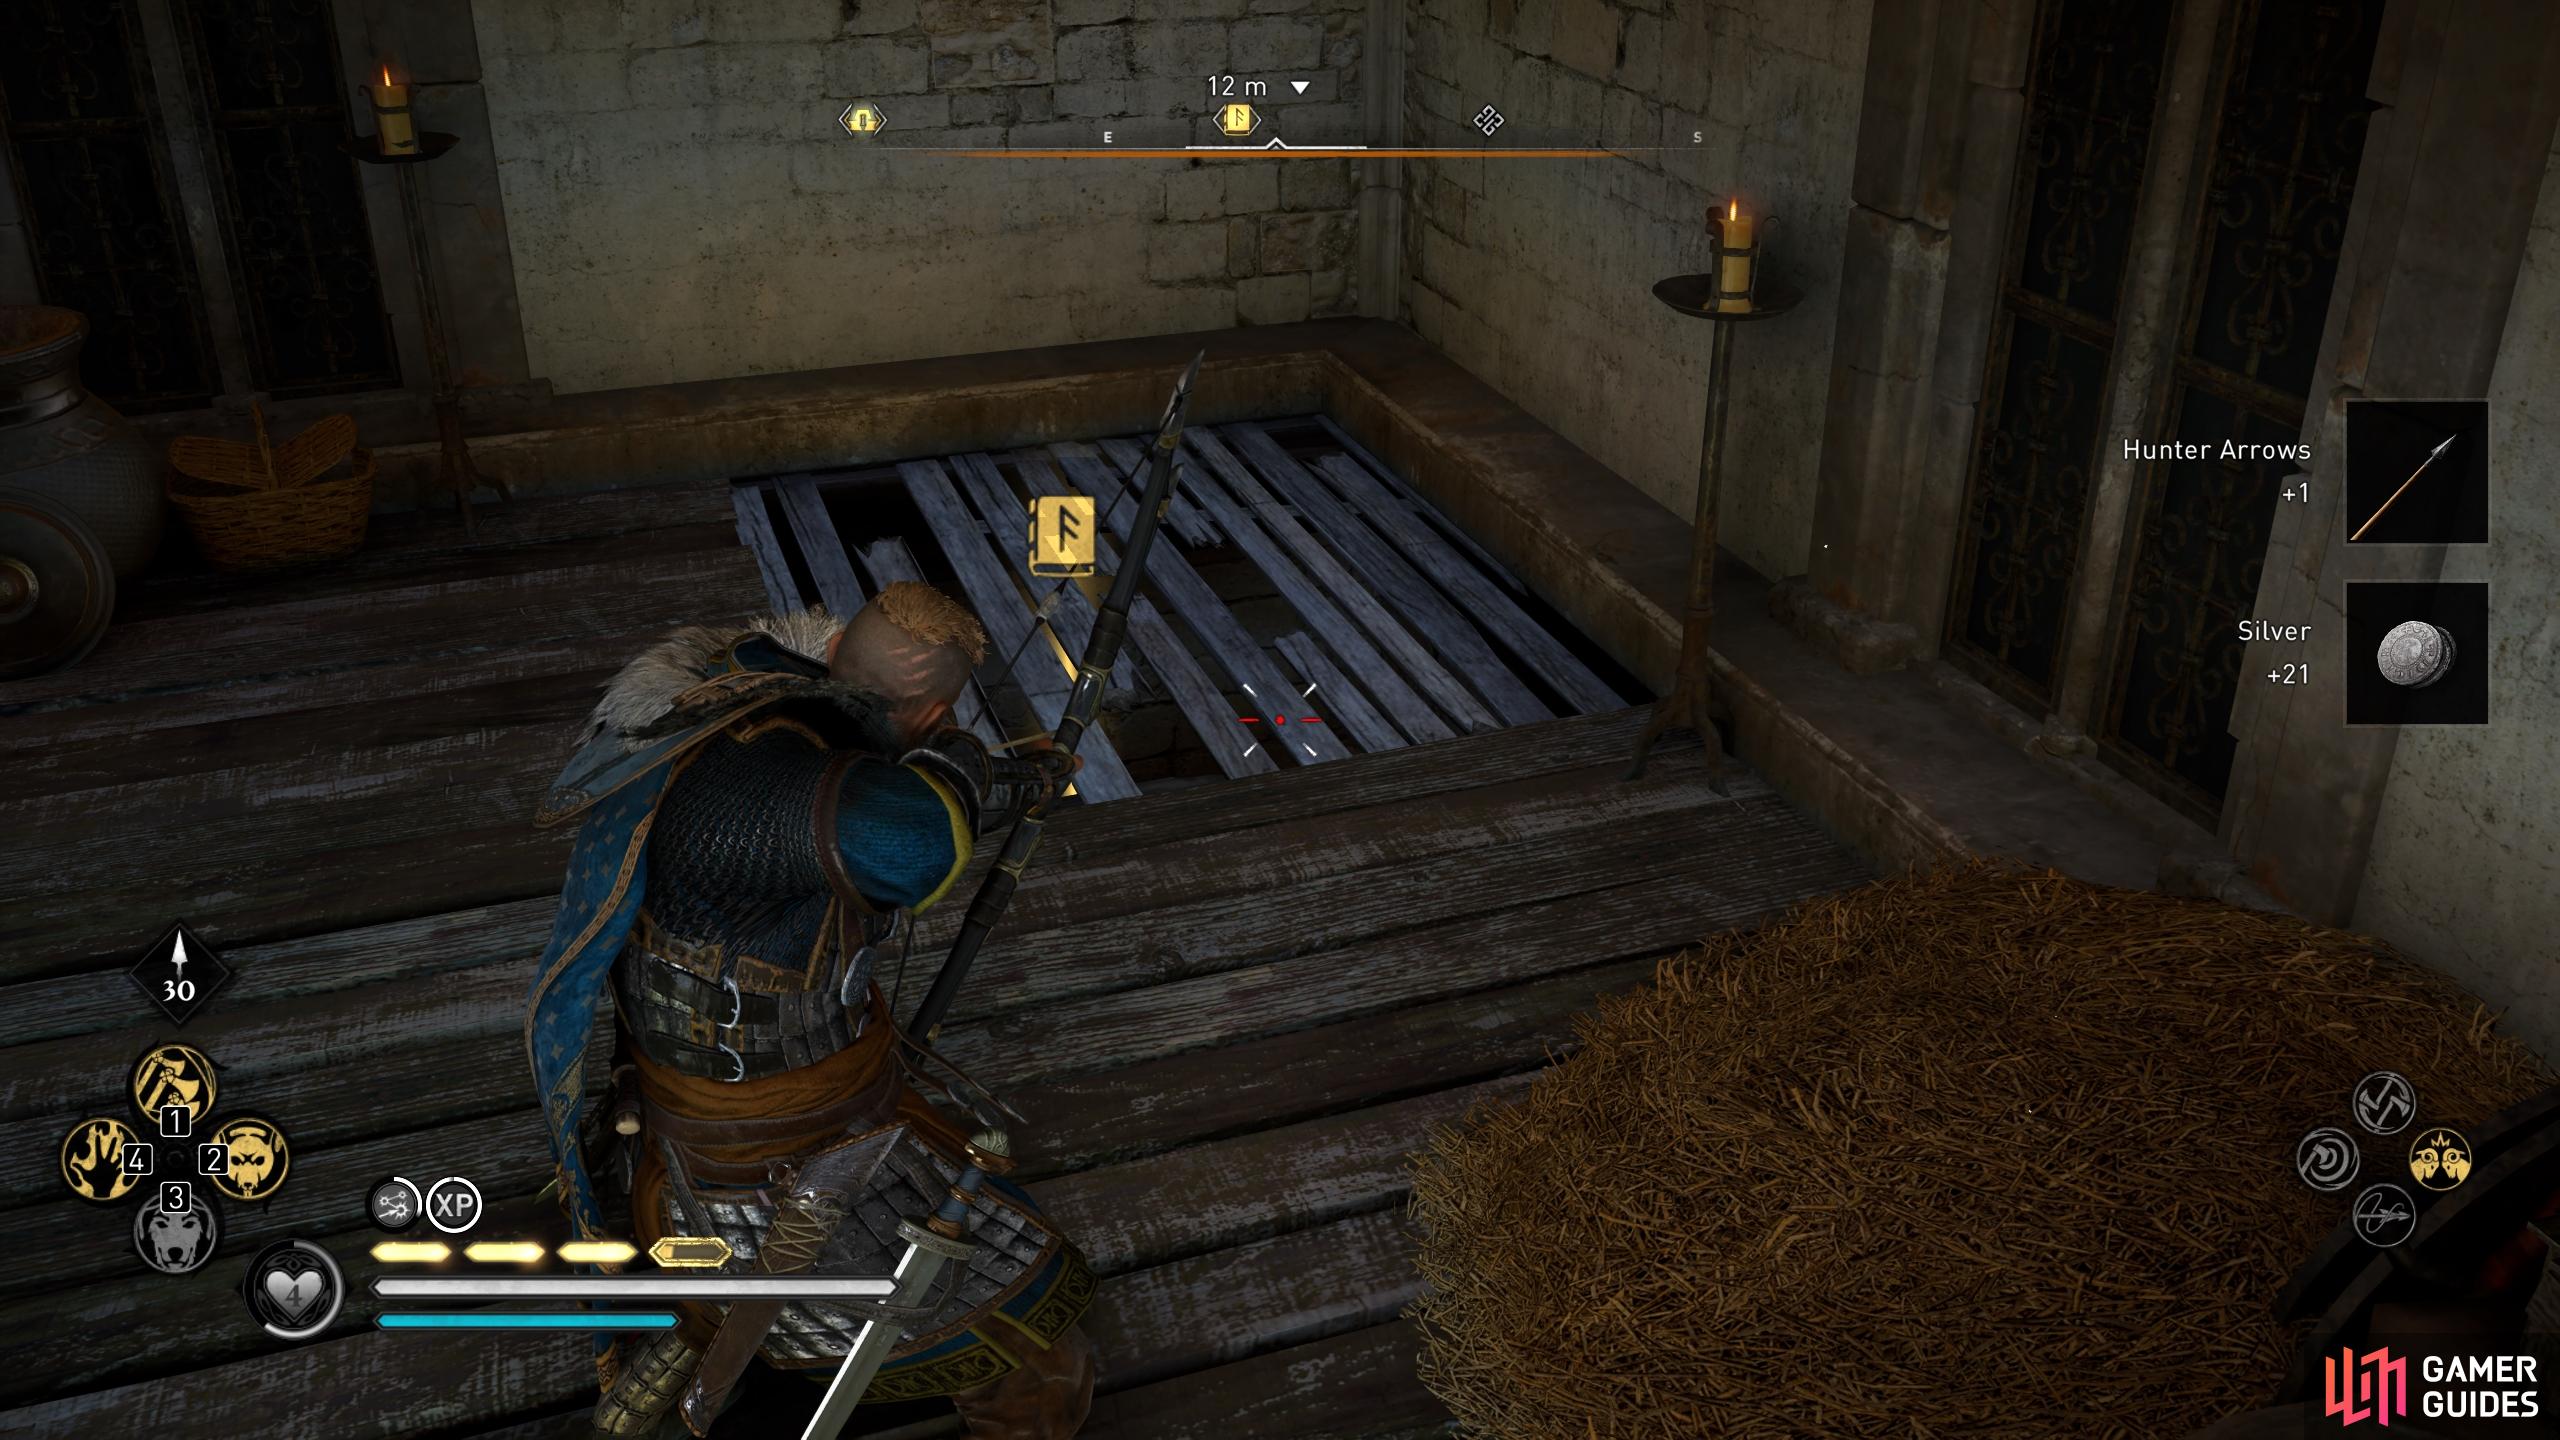 Once inside the tower, shoot the wooden barrier on the floor to enter a hidden room.